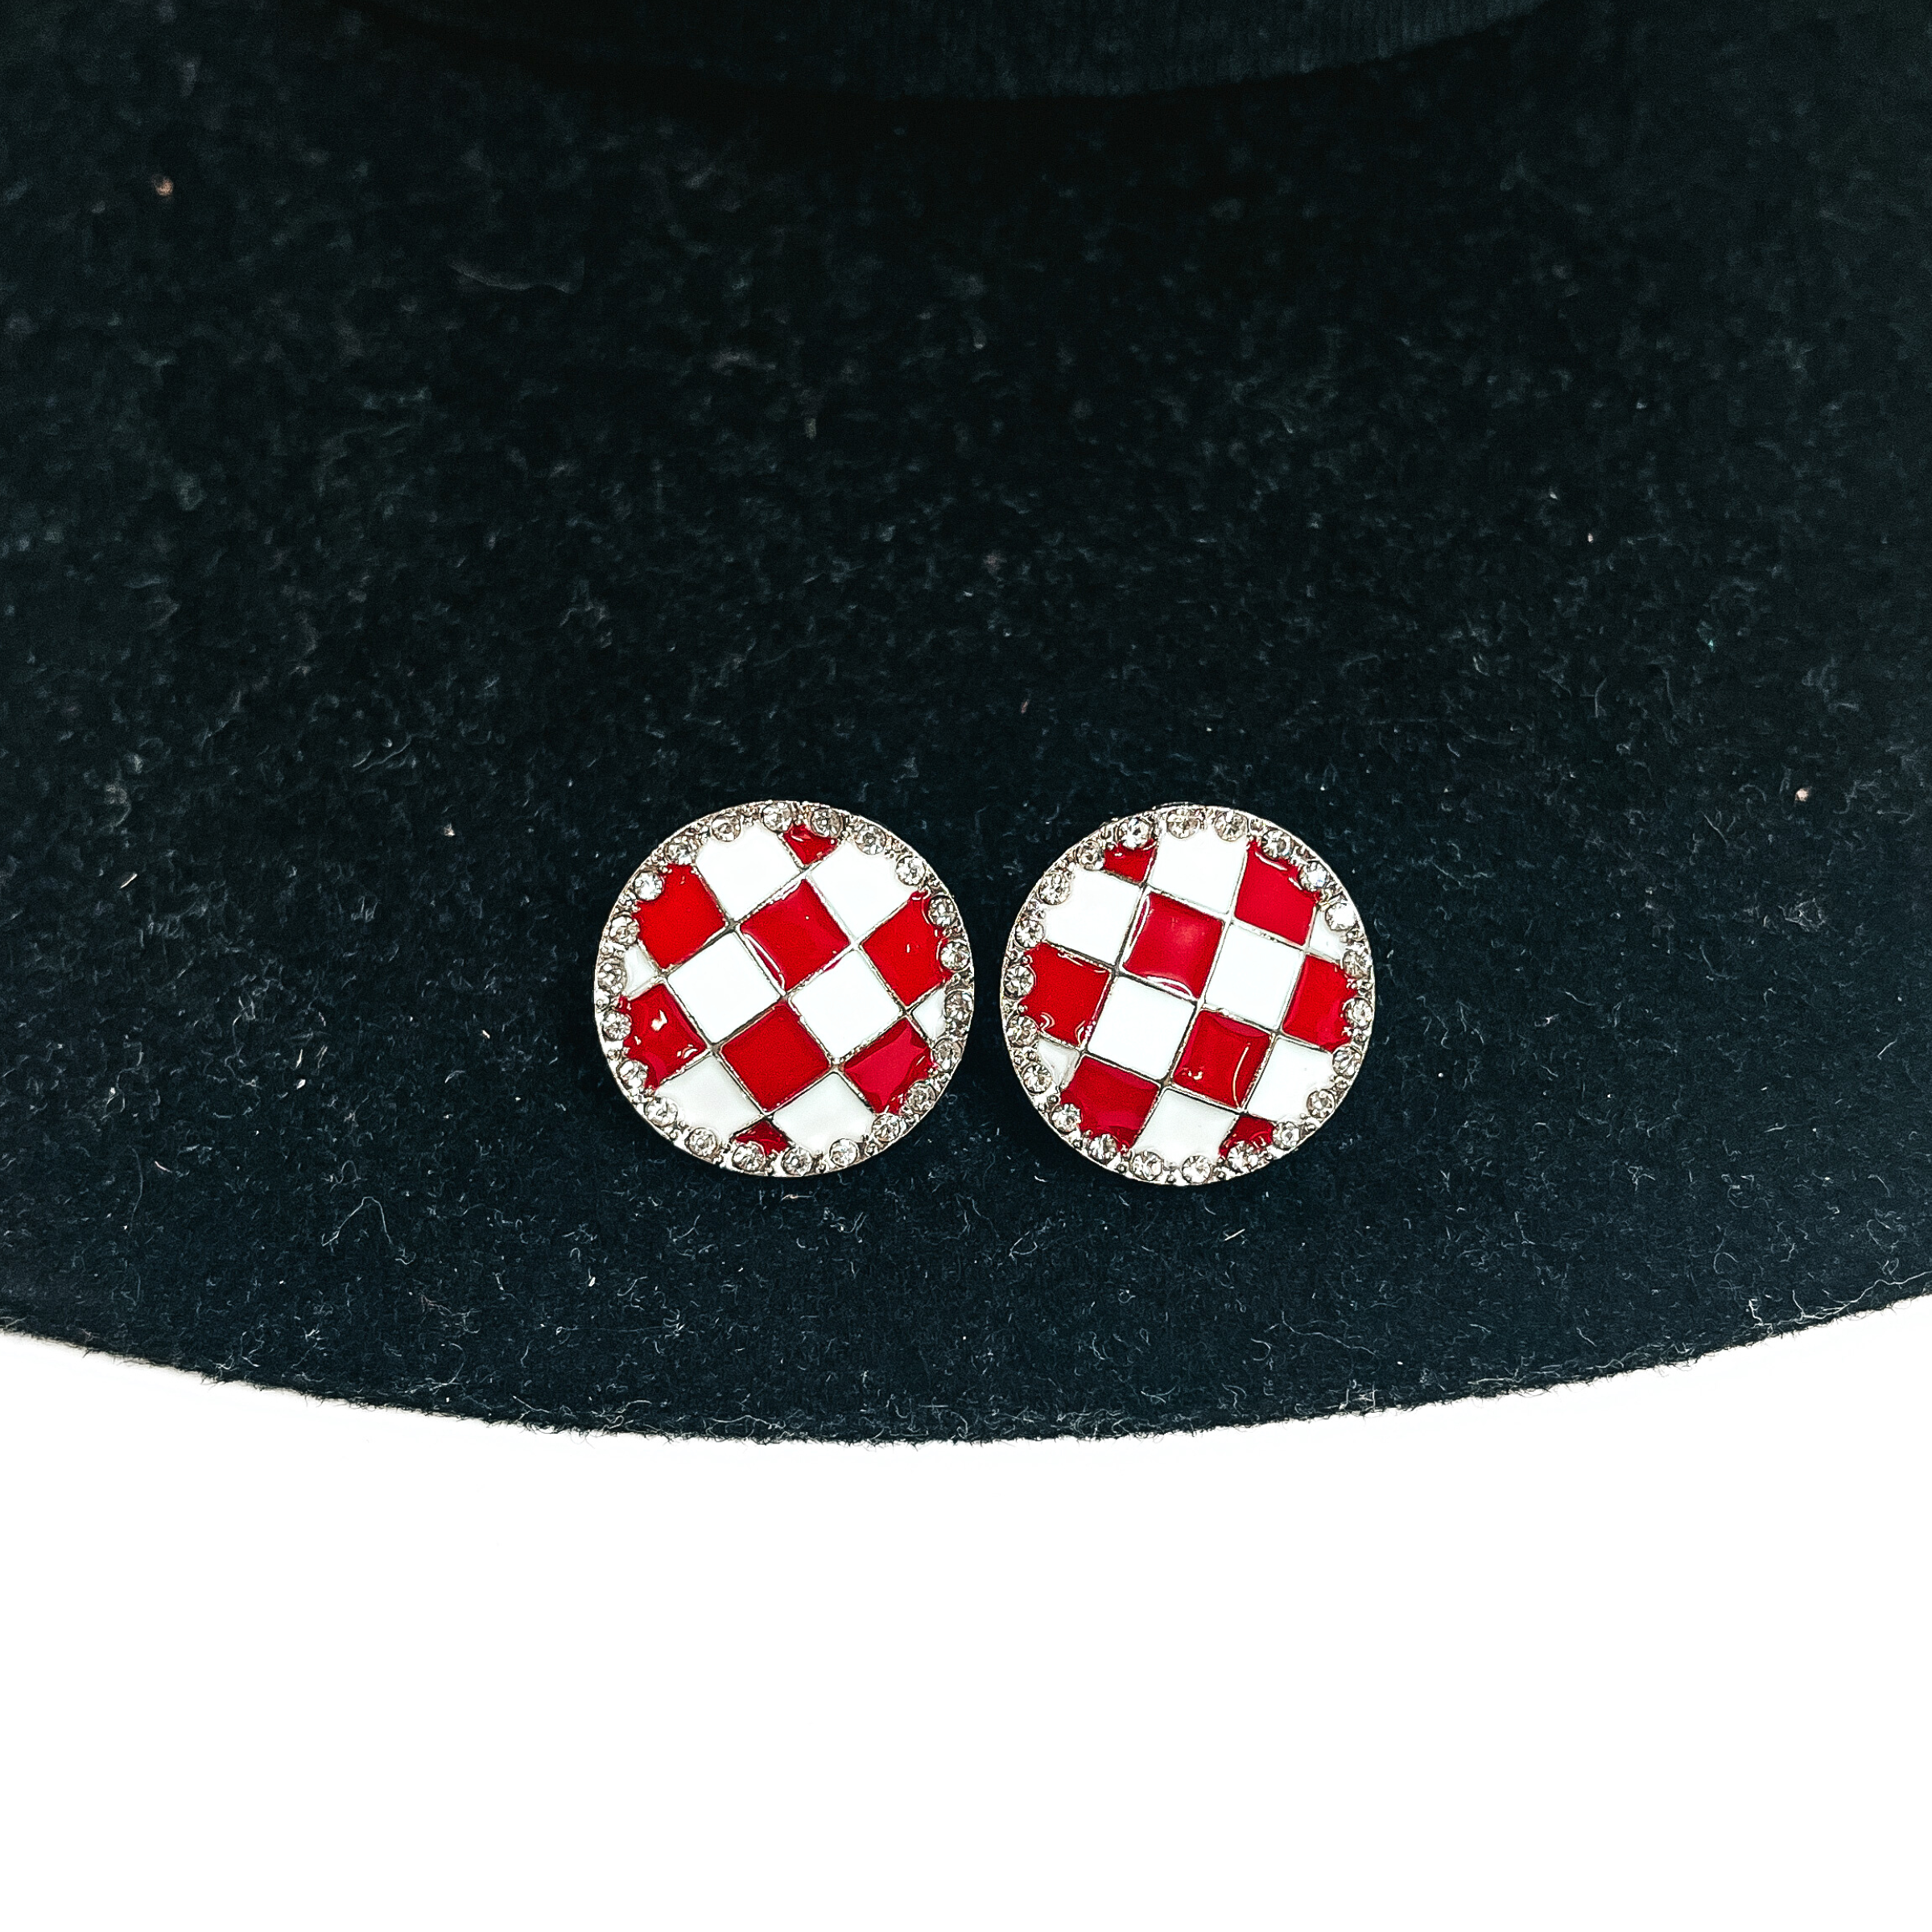 This is a white and red checkered patterned stud earrings in a silver  setting with clear crystals all around. This pair of  earrings is laying on a black felt hat brim and on a white background.